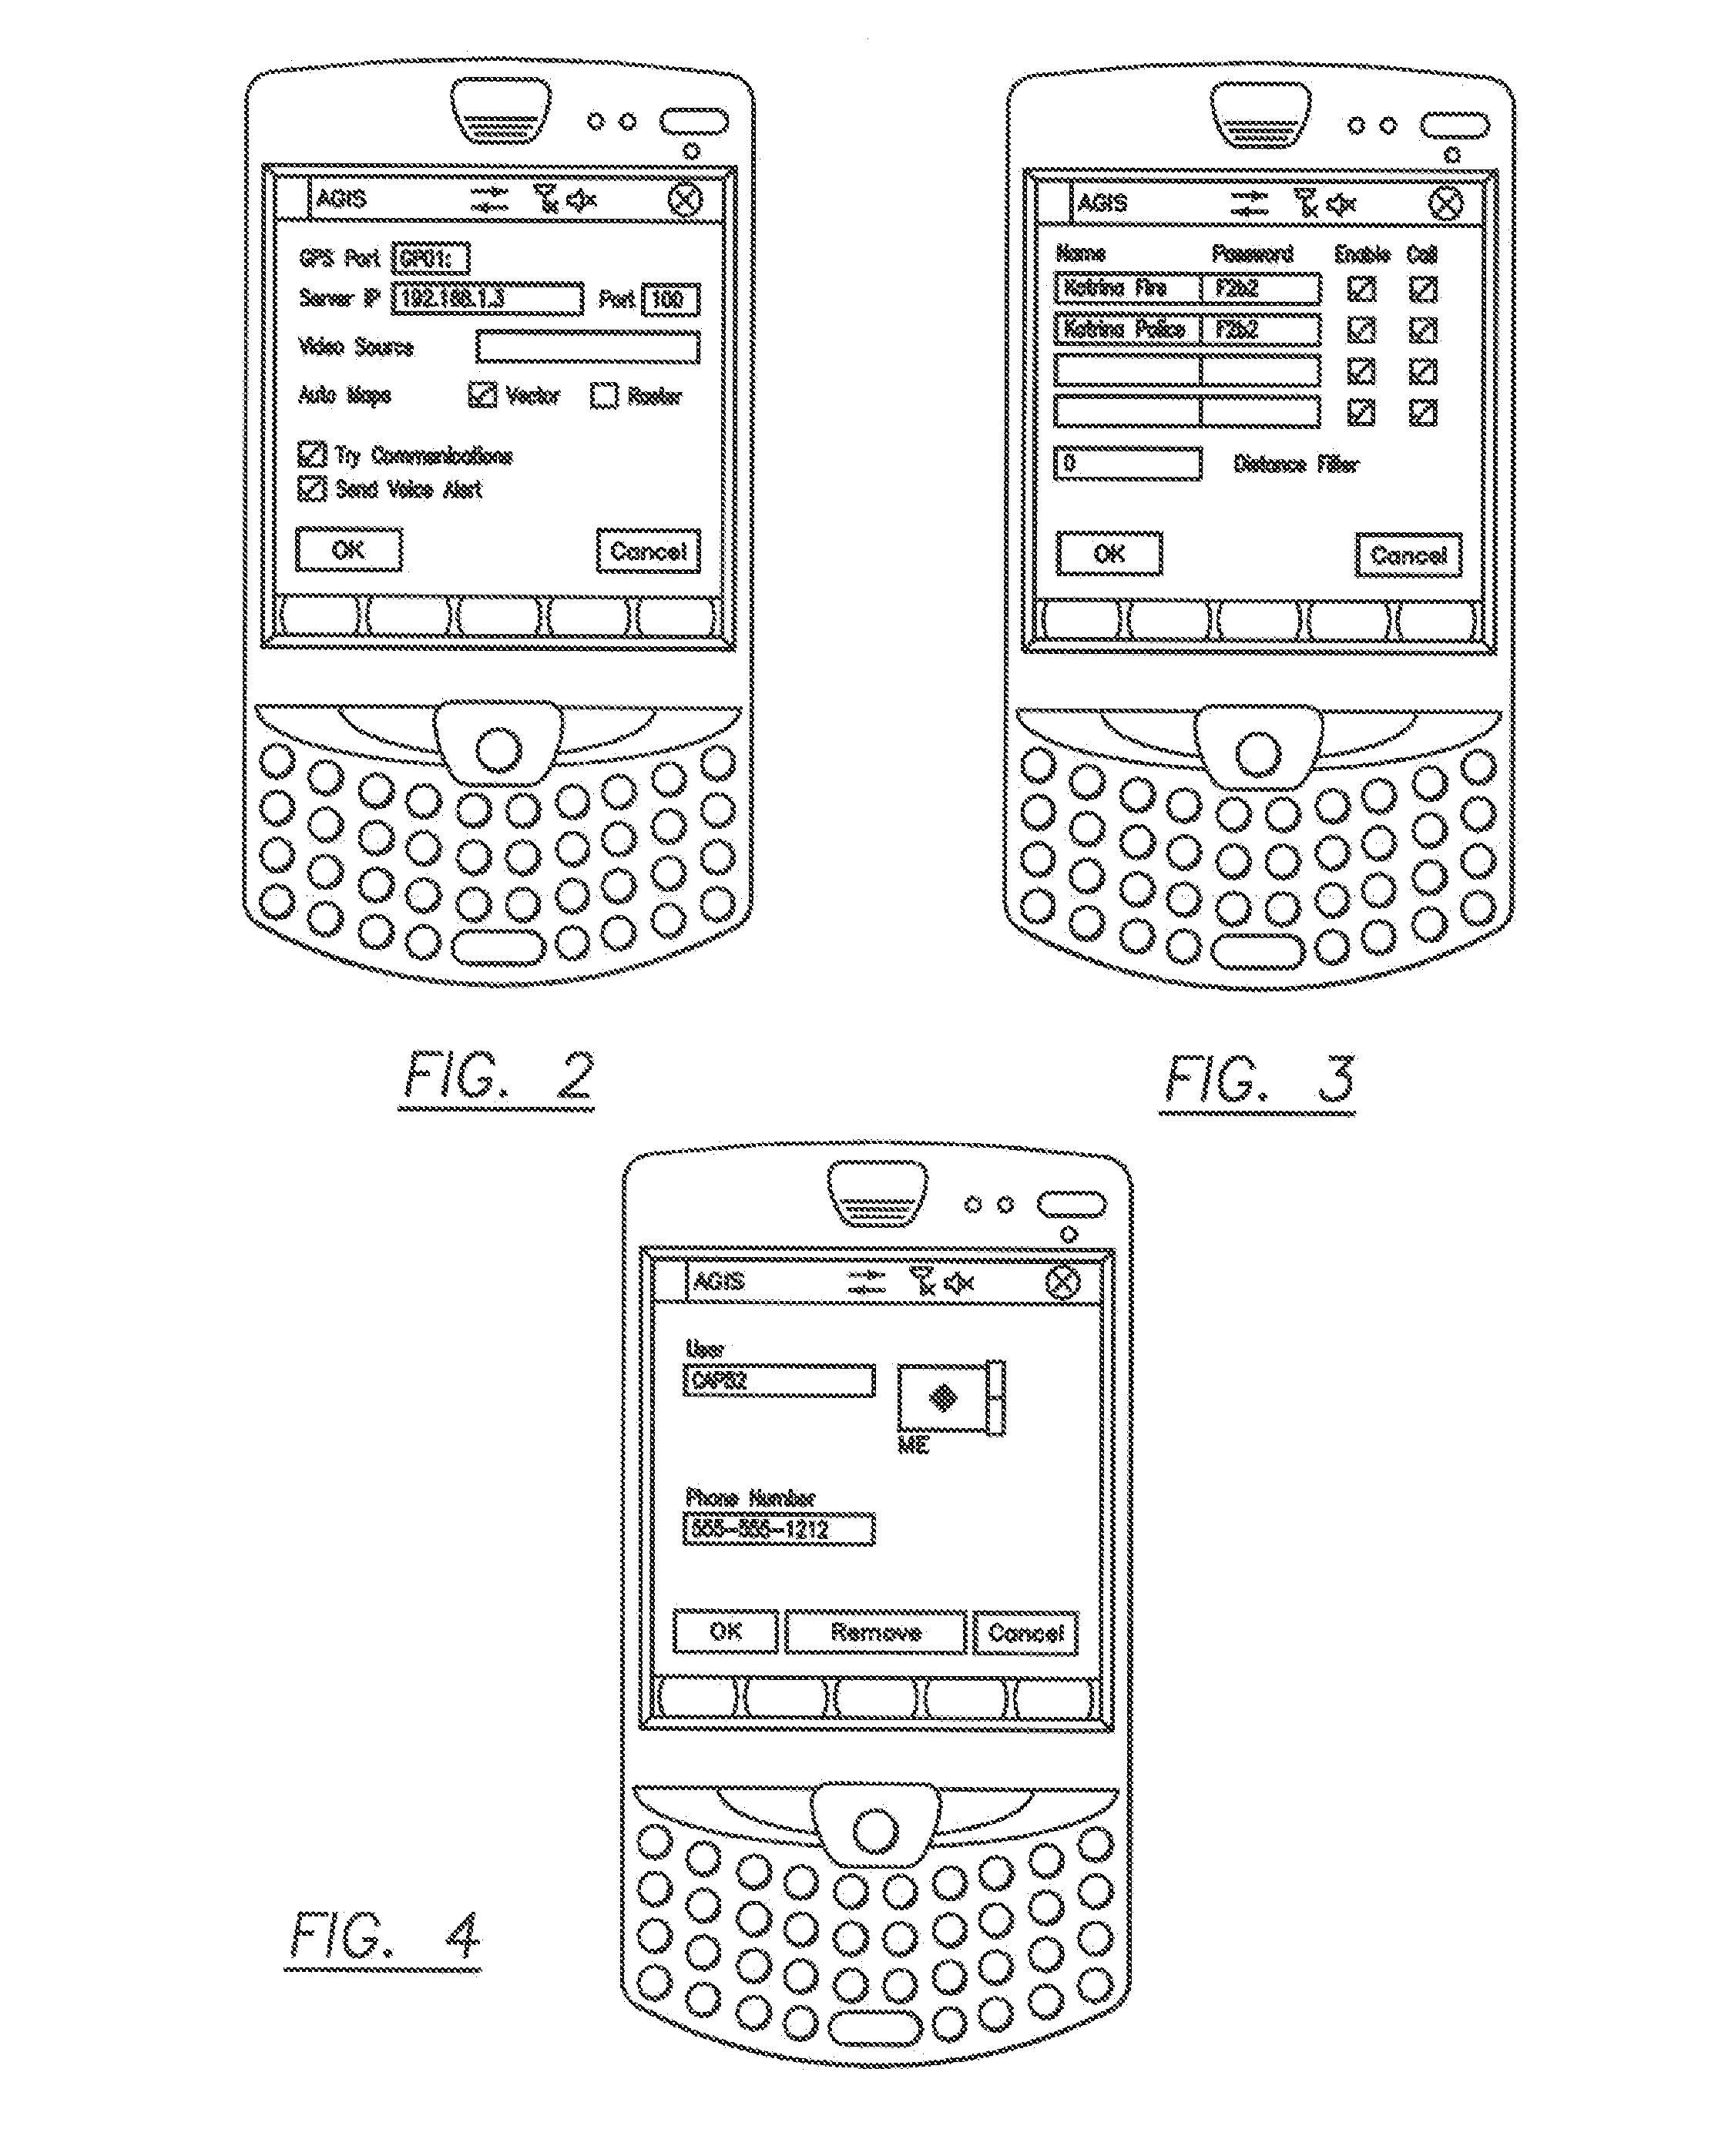 Method to provide ad hoc and password protected digital and voice networks